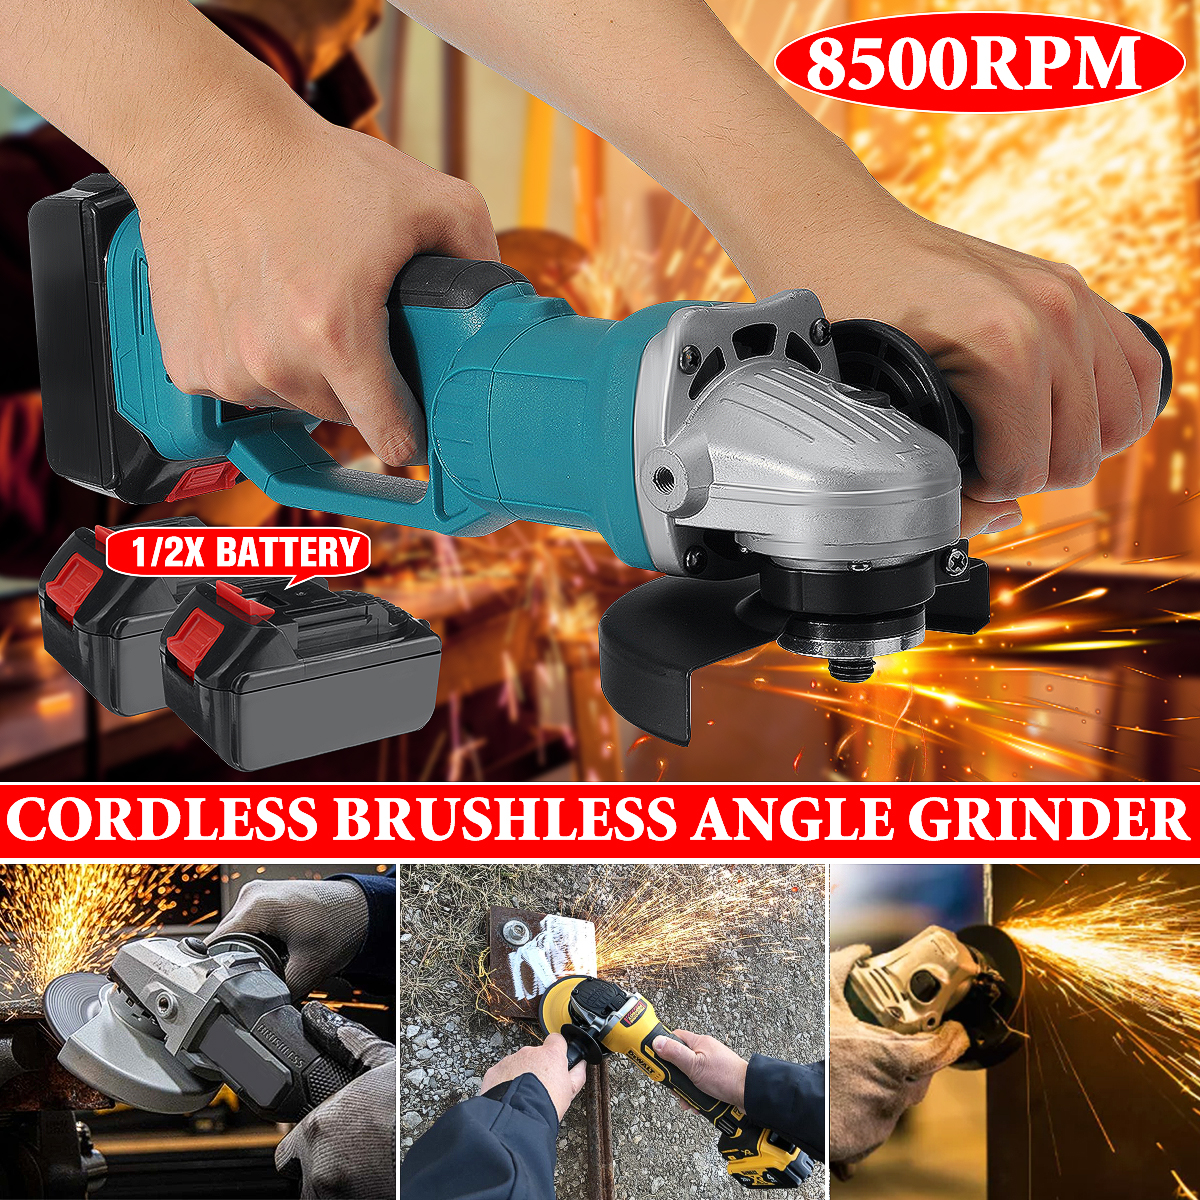 125mm-Brushless-Rechargable-Angle-Grinder-W-12-Battery-Metal-Stone-Wood-Plastic-Cutting-Polishing-To-1875442-1